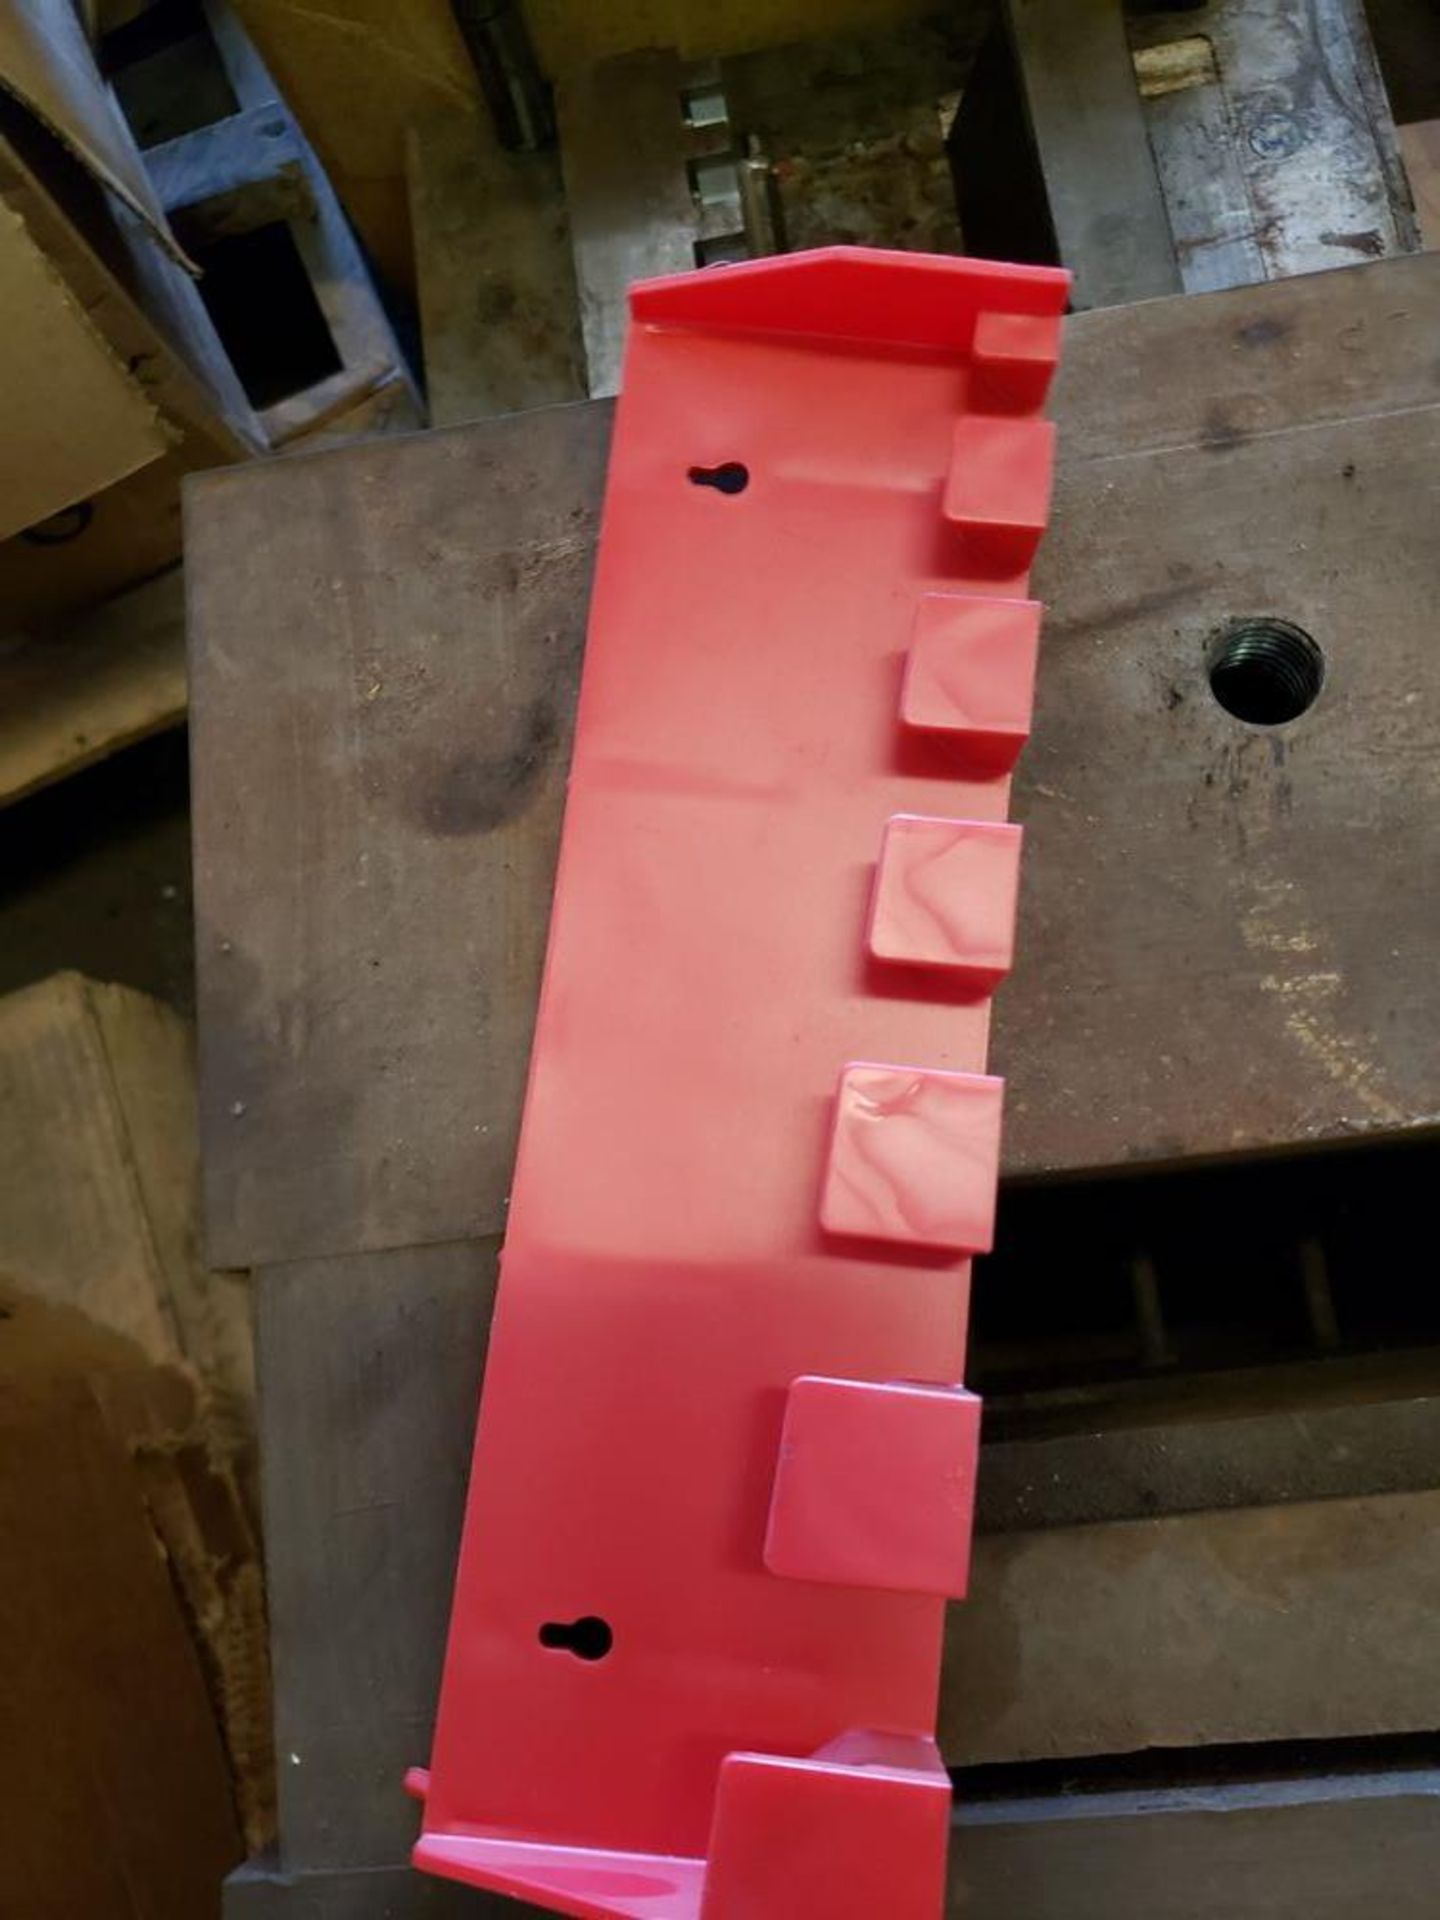 SKID OF 5 MOLDS FOR PEG BOARD HOLDERS / TOOL HOLDERS - Image 2 of 7